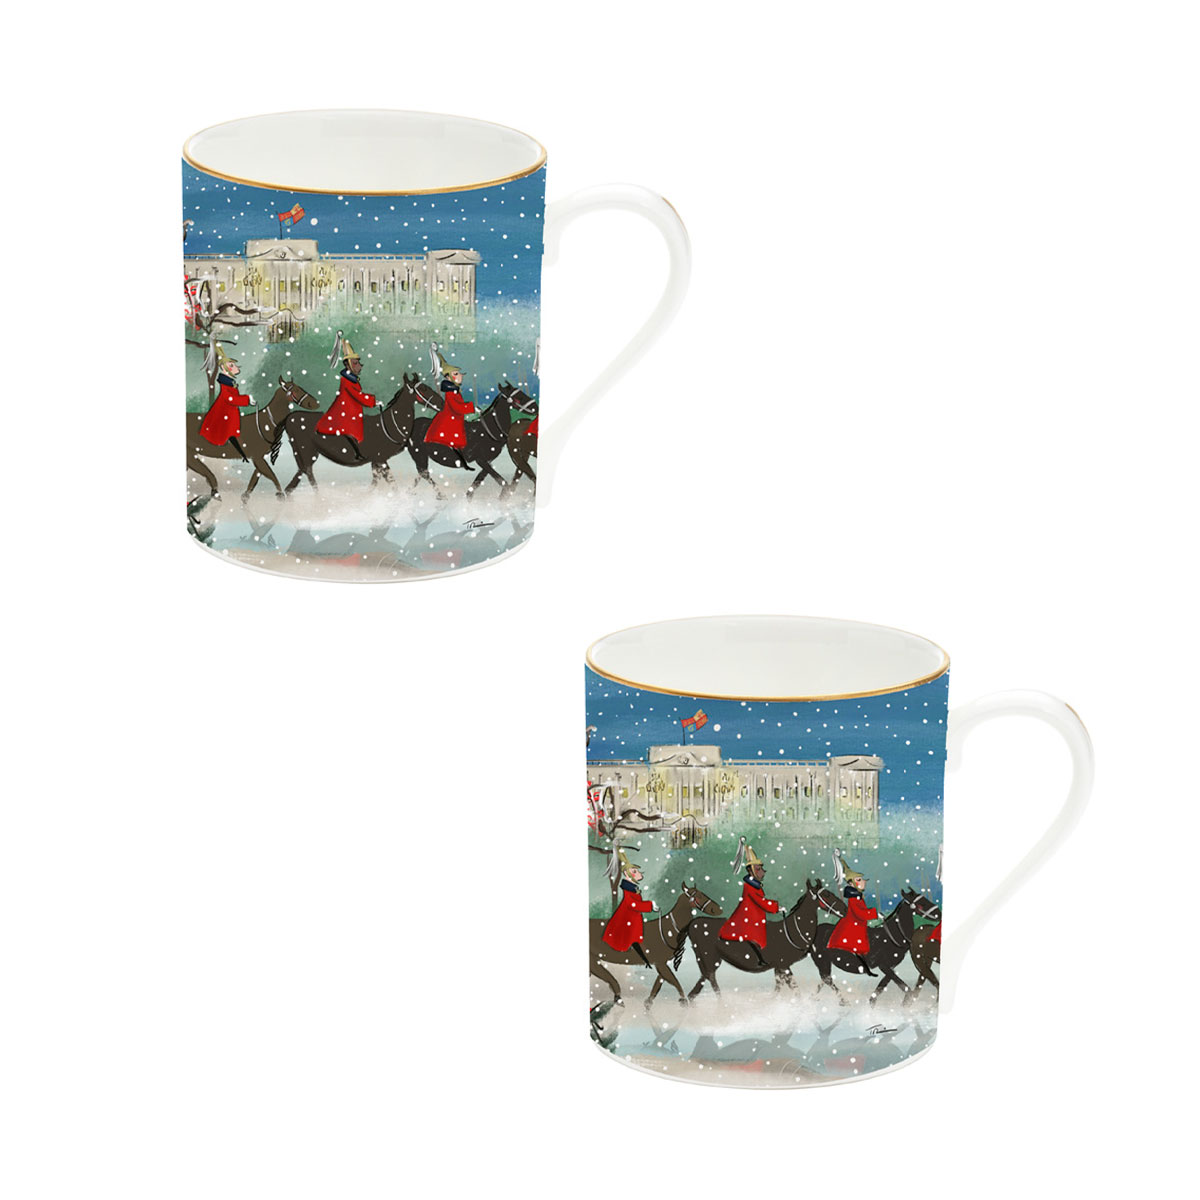 Halcyon Days Life Guards in the Snow Blue Mug Set of 2